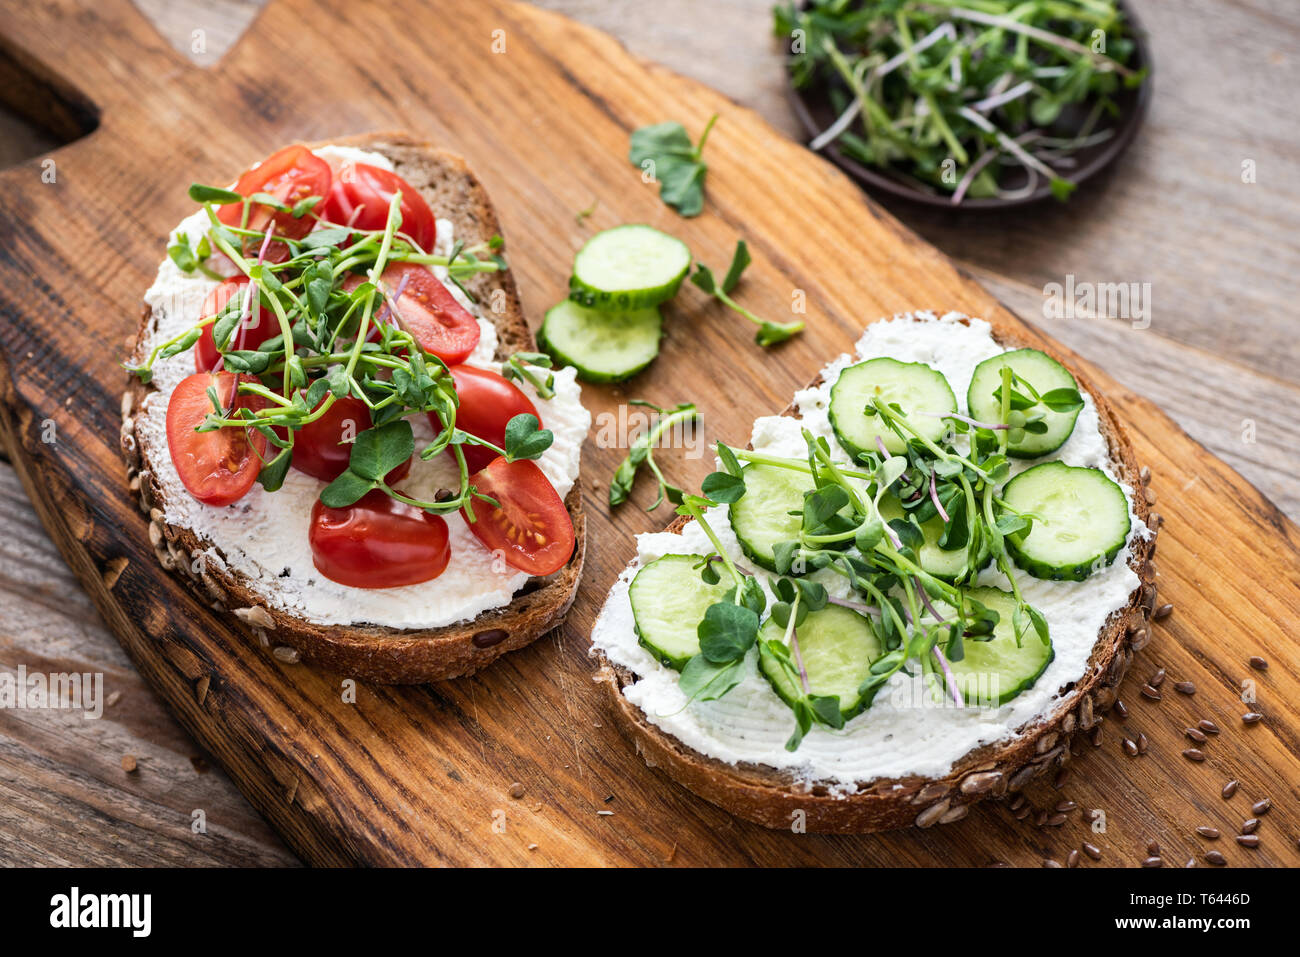 Healthy toasts with cream cheese, cucumber, cherry tomato and microgreen on wooden board. Appetizer or breakfast food Stock Photo